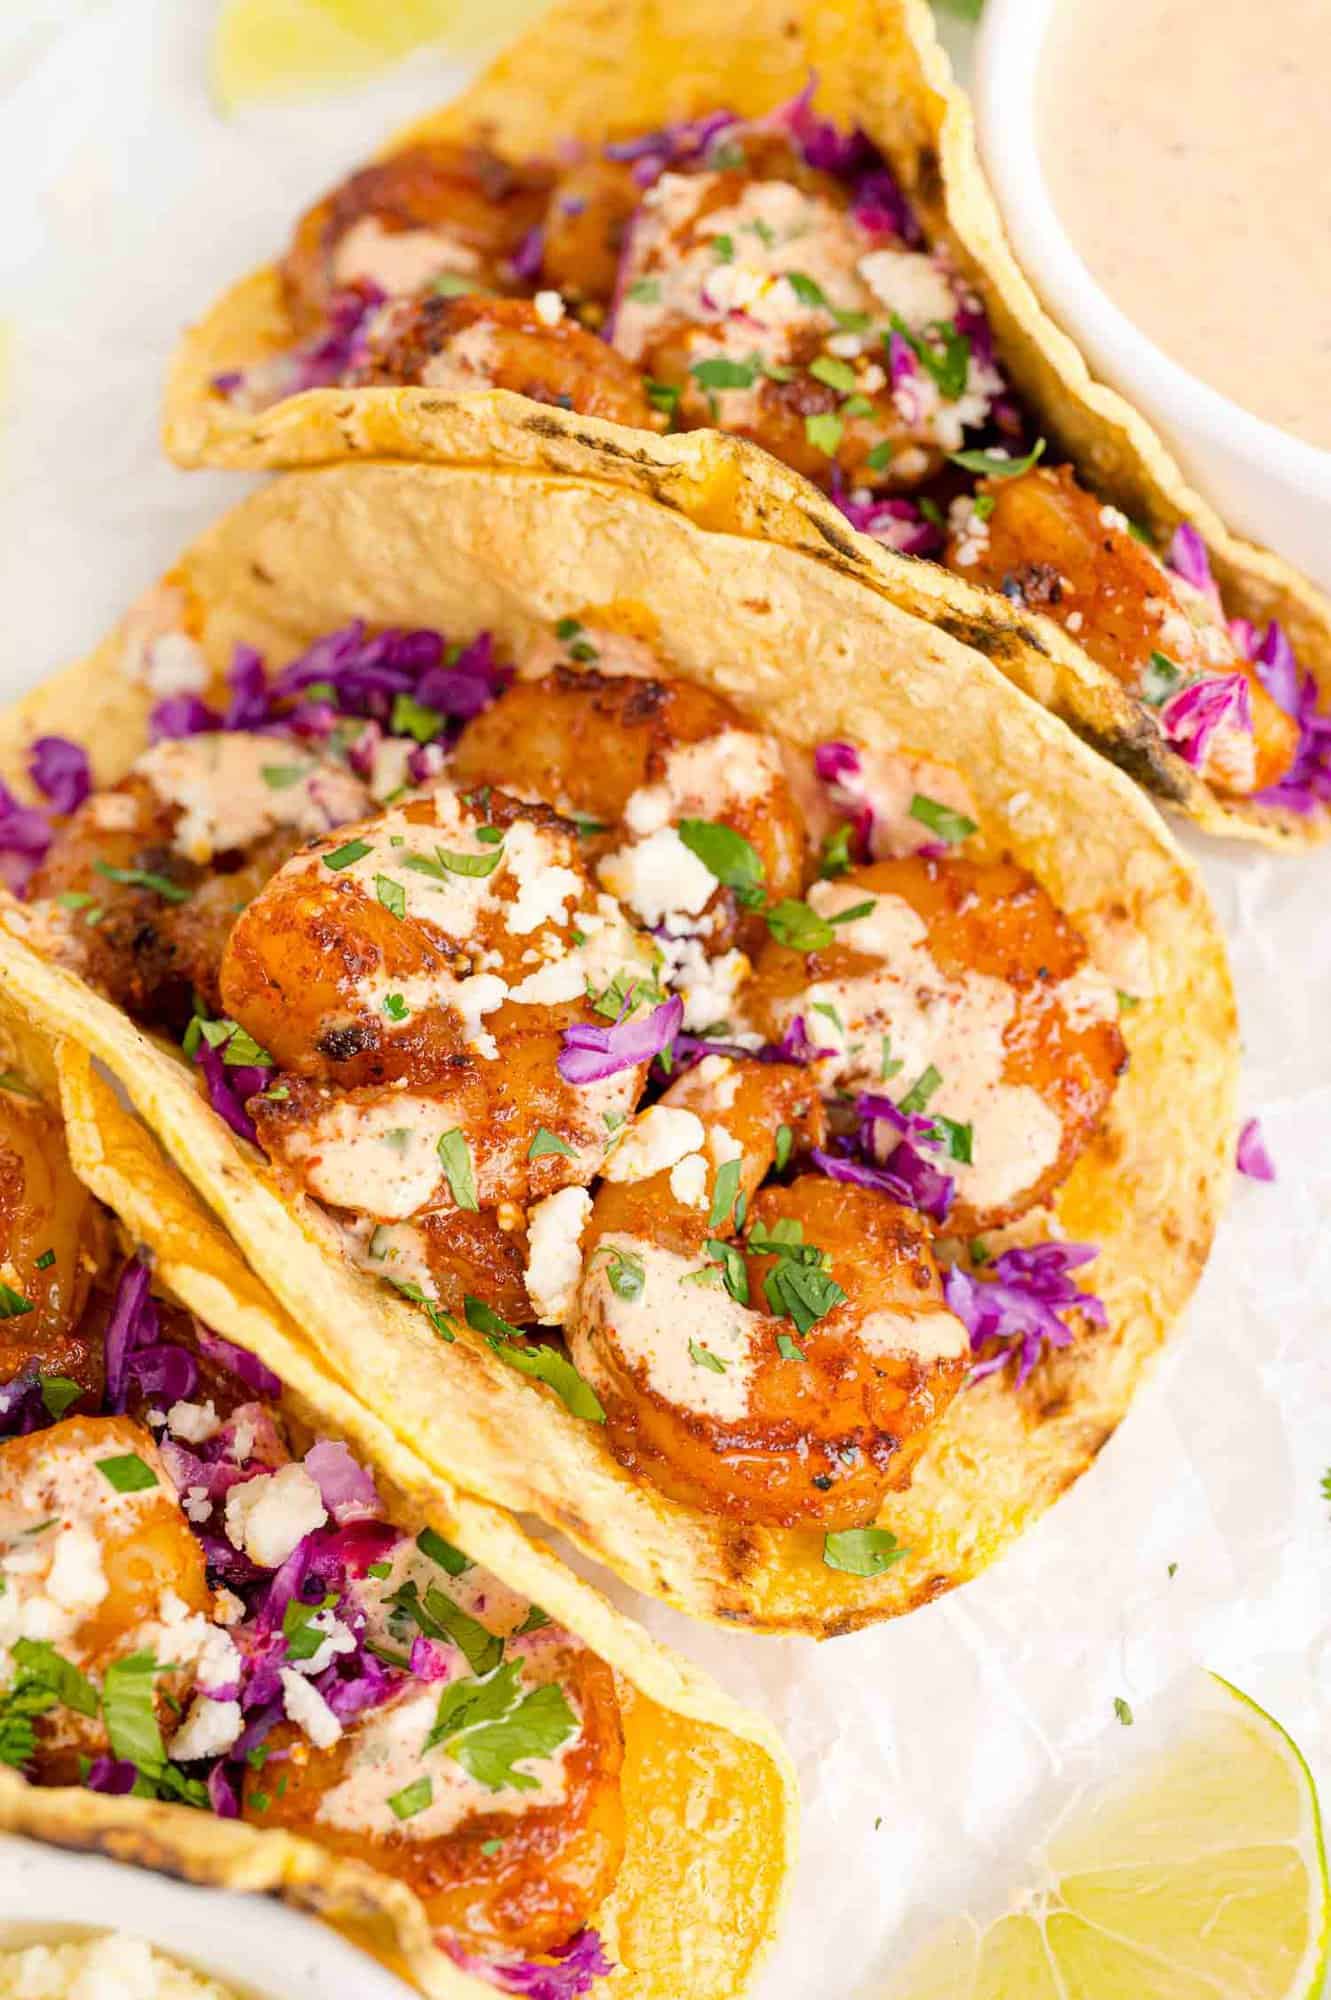 Shrimp tacos with creamy drizzle, red cabbage, cotija.